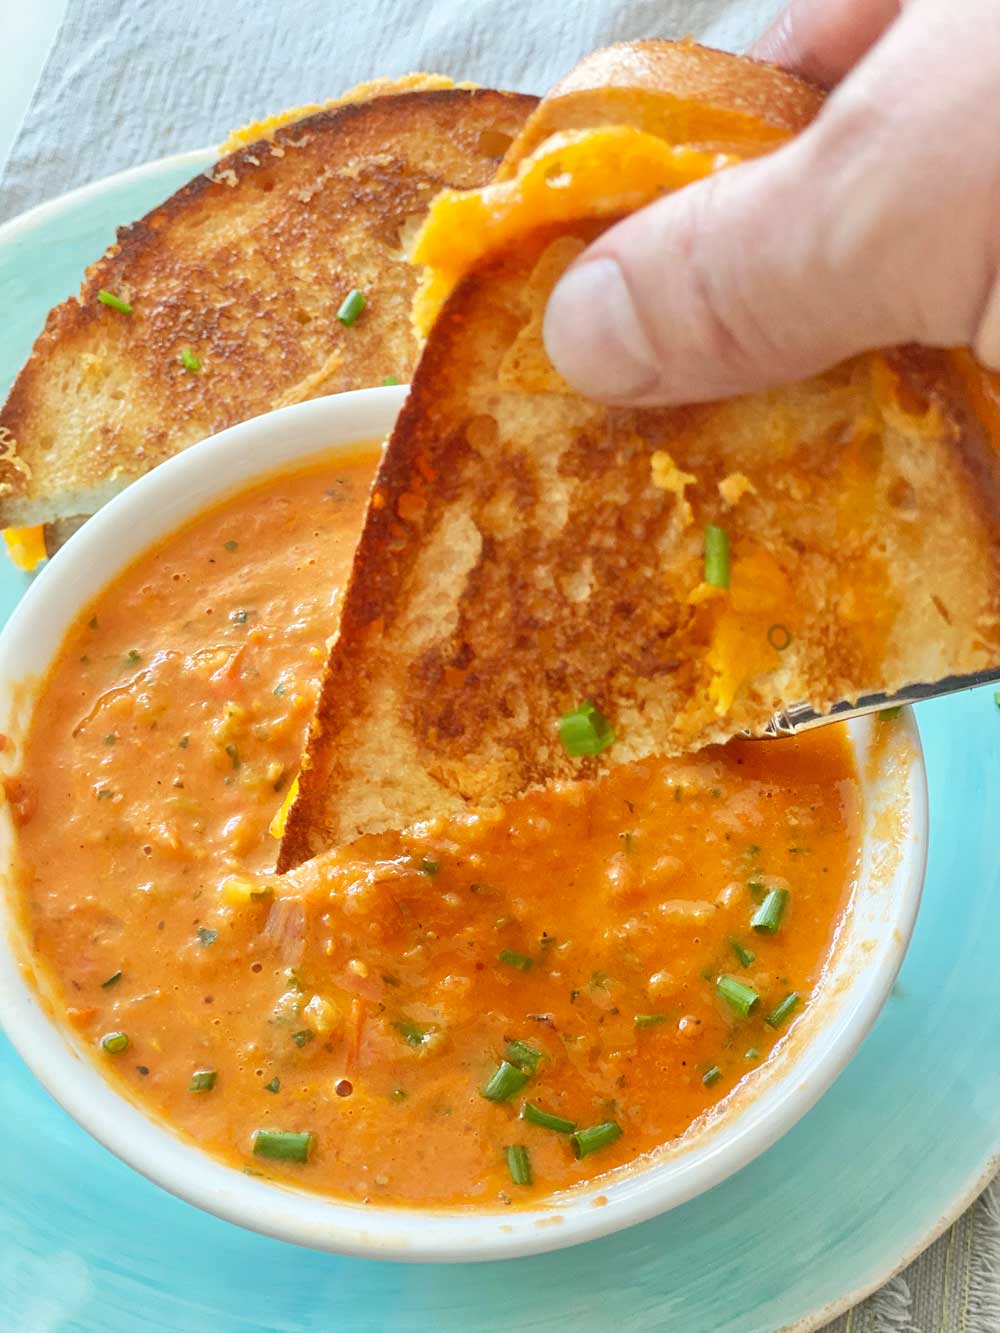 How To Make The Best Tomato Soup. Place tomatoes, shallots, roasted garlic, and seasoning on a sheet pan and roast in the oven. This is a simple soup recipe that has grilled cheese dunking fun. Happy Tomato Soup Cooking! www.ChopHappy.com #tomatosoup #roastedtomatosoup